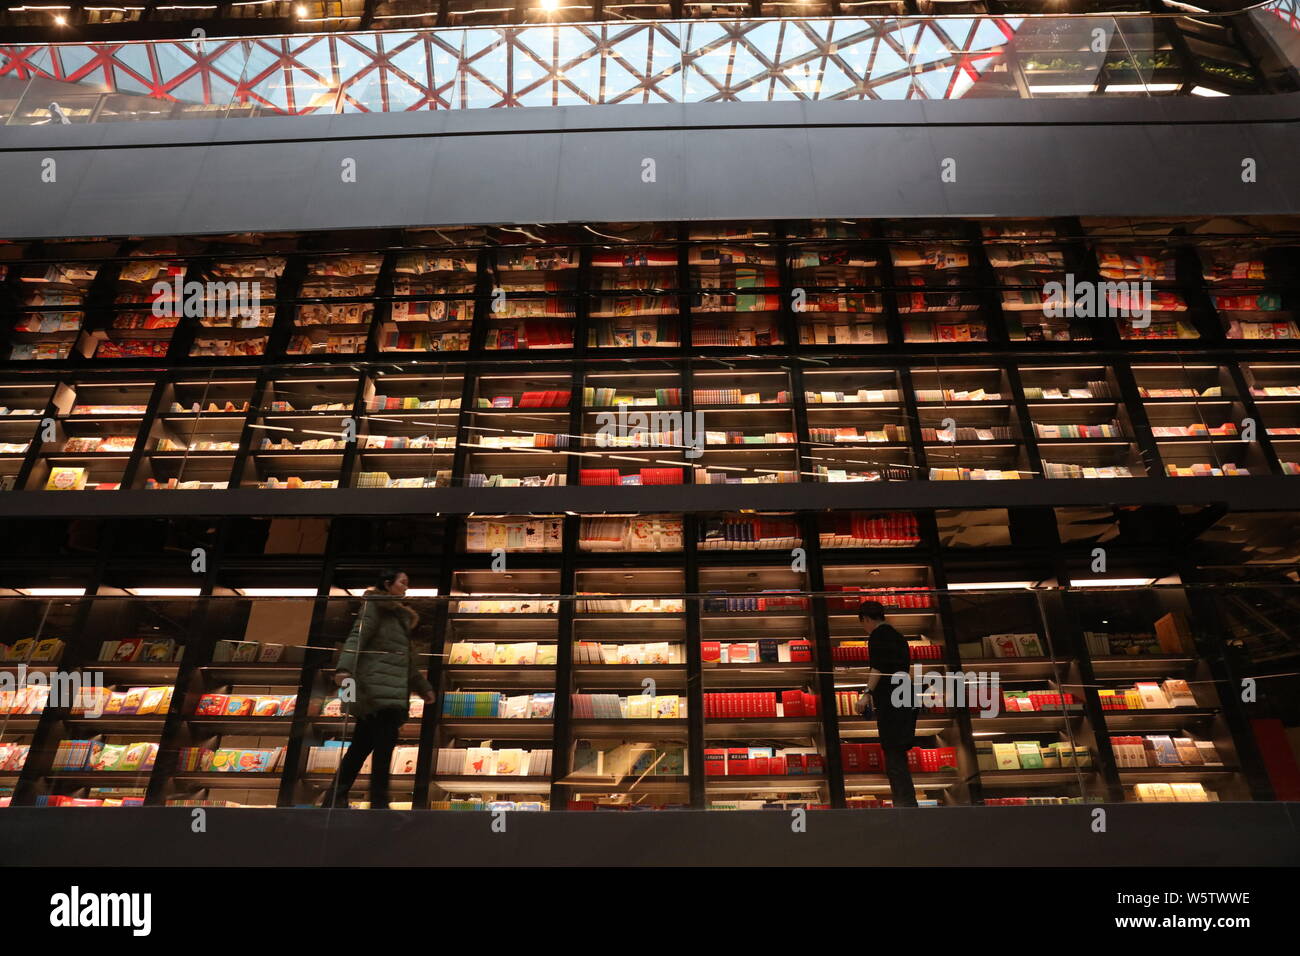 Books are placed on the four-storey-high book wall decorated with glass with a height of 18 meters at a shopping mall in Xi'an city, northwest China's Stock Photo